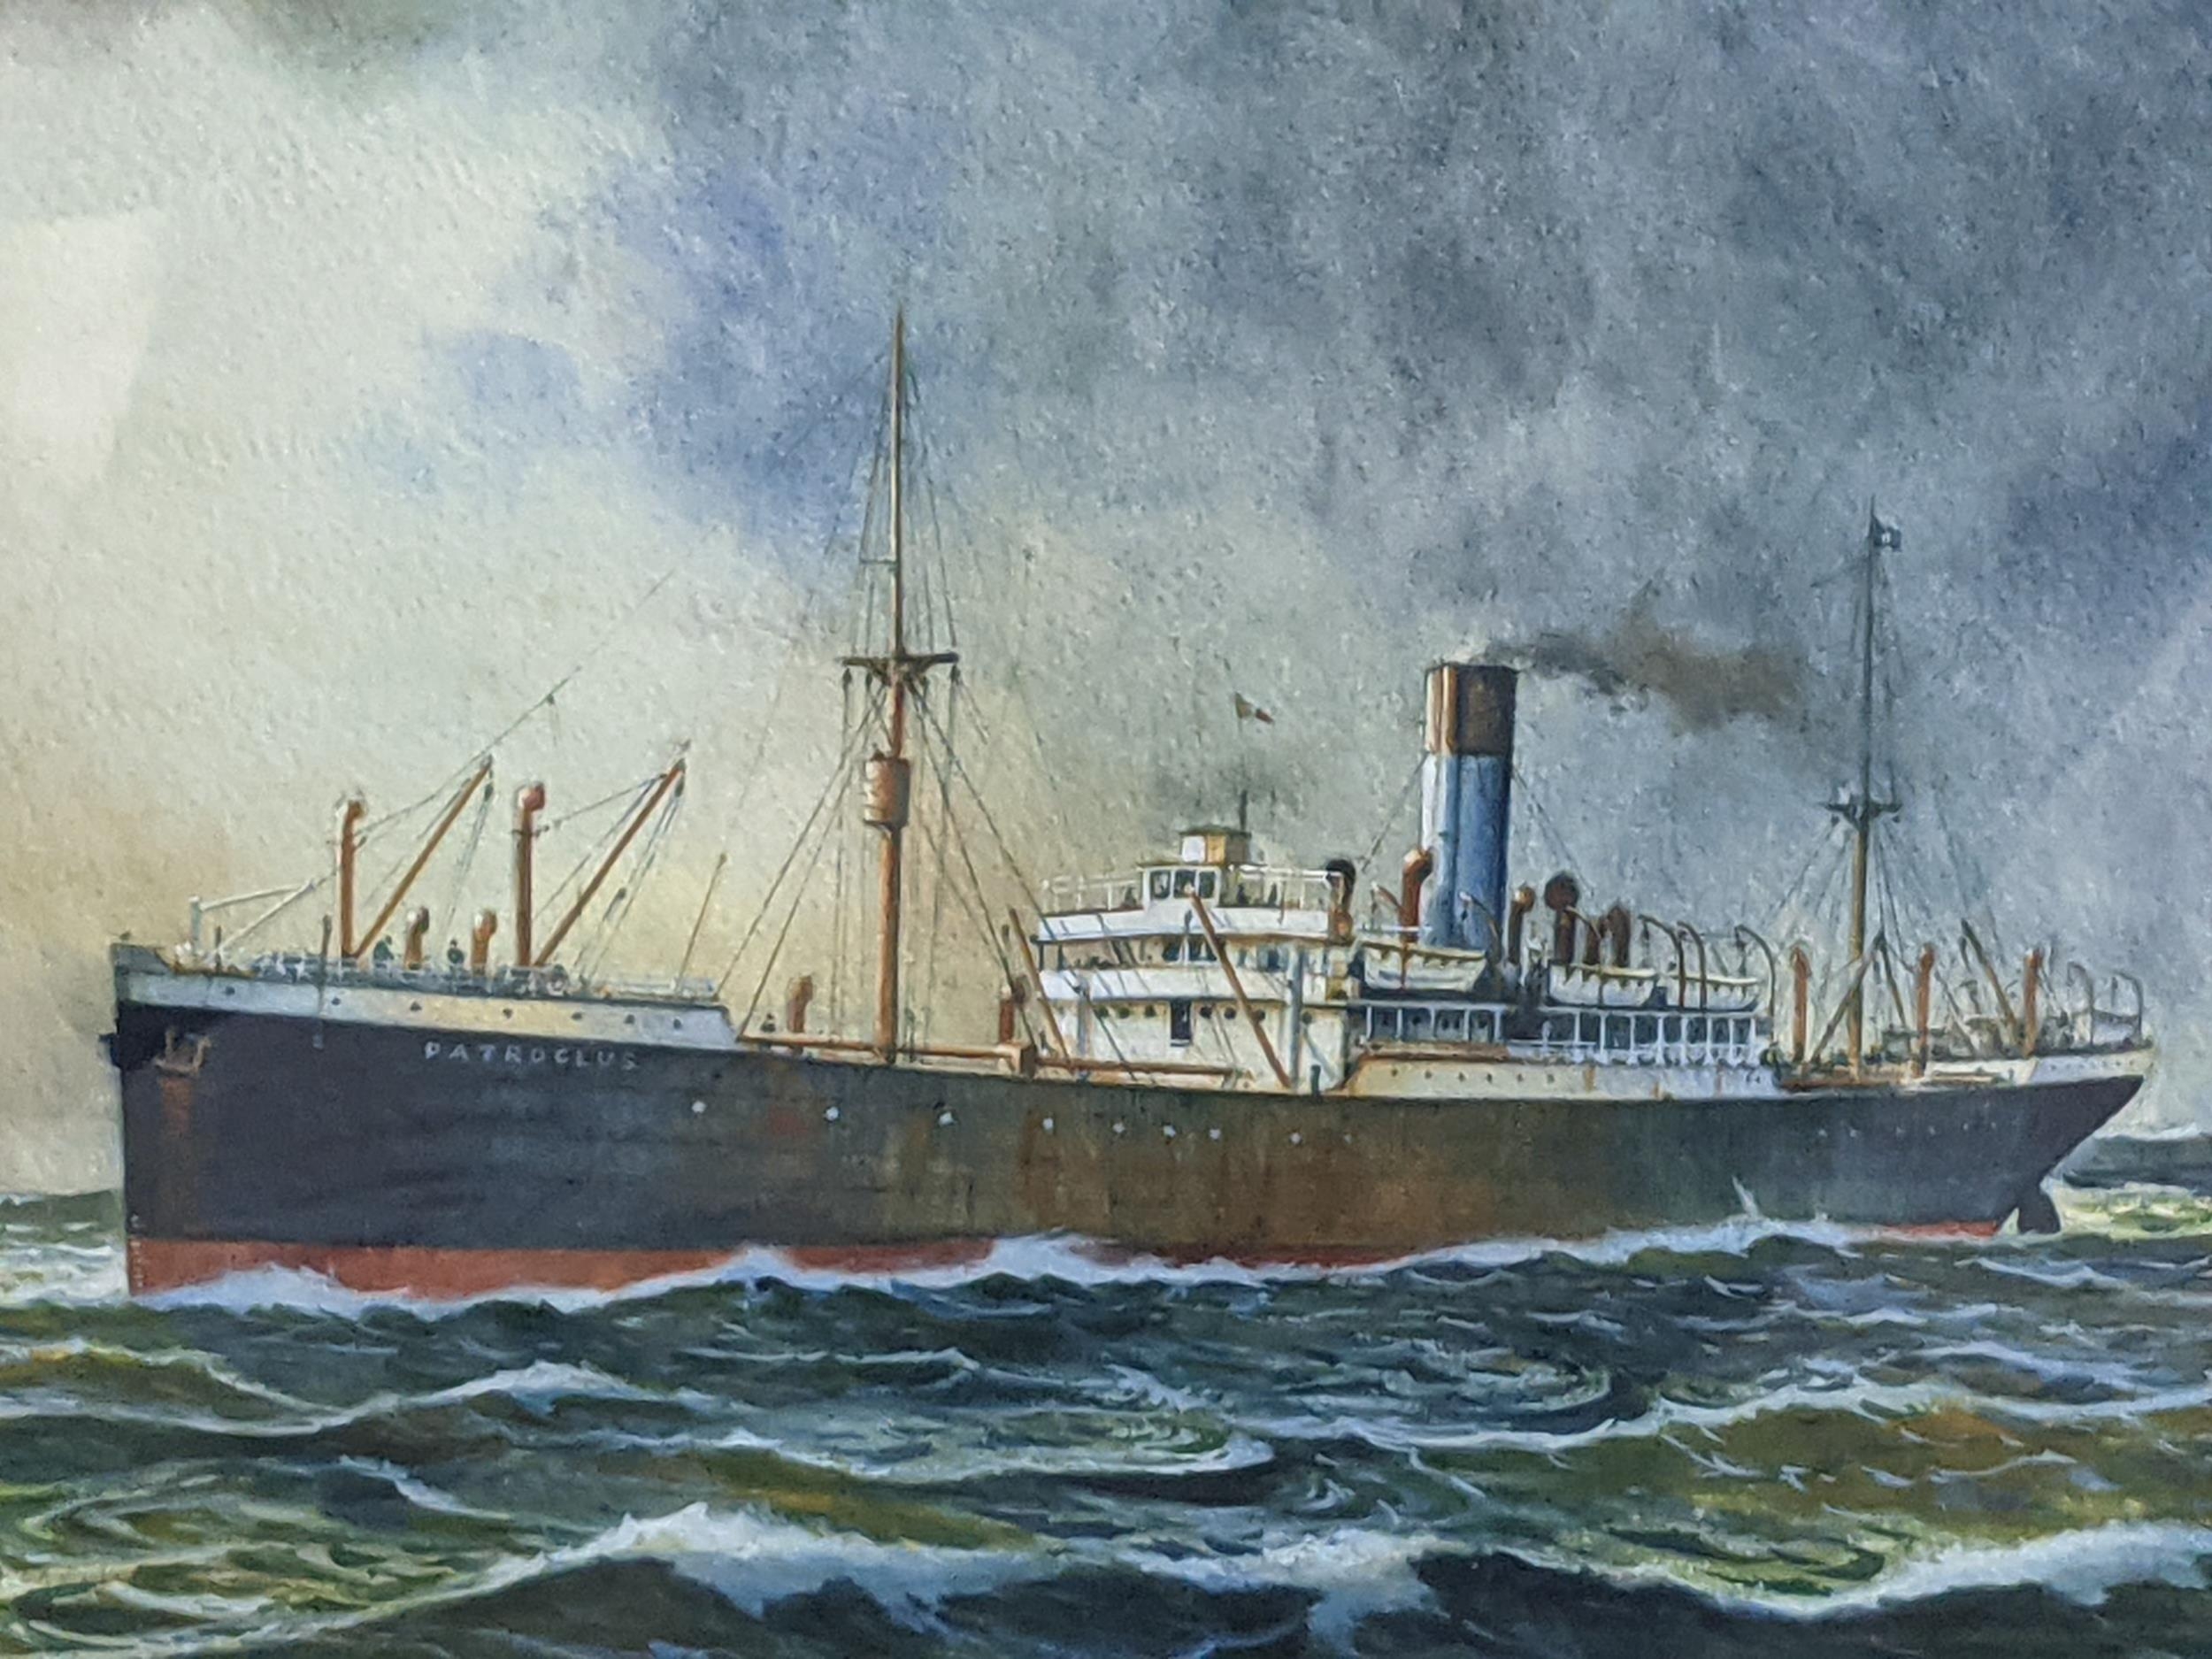 A watercolour depicting HMS Patroclus, a British Armed Merchant Cruiser and another boat in the - Bild 4 aus 10